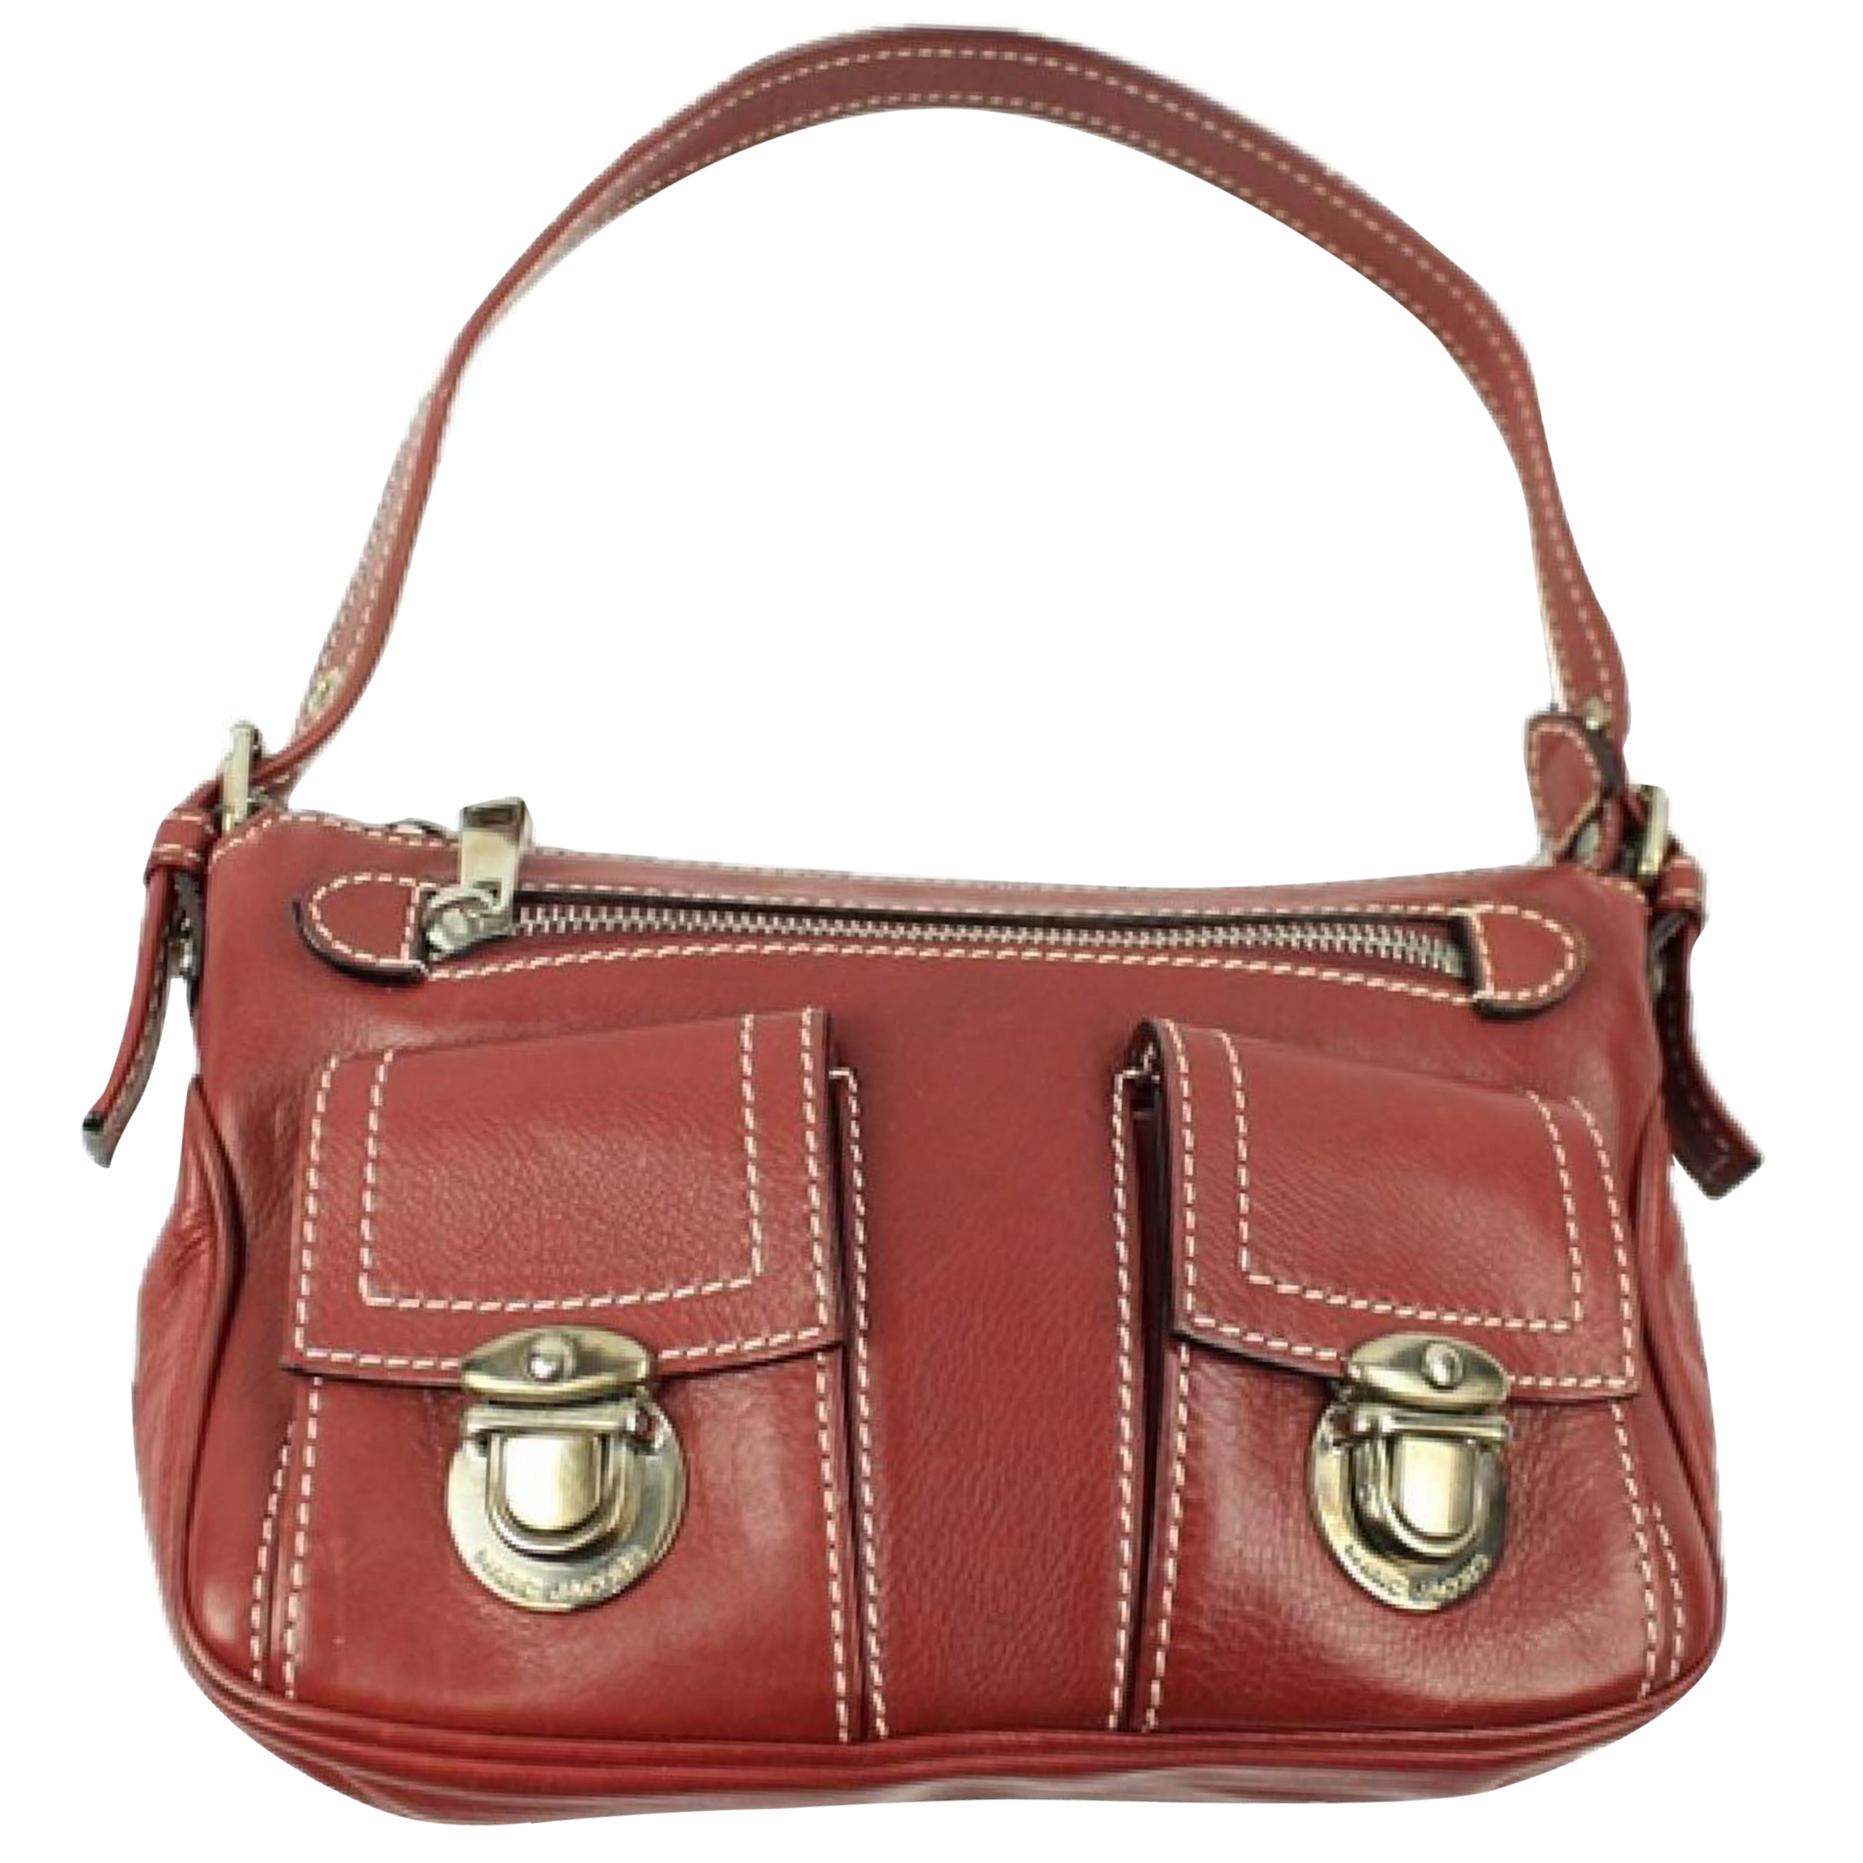 Marc Jacobs Mjbsl04 Red Leather Hobo Bag For Sale